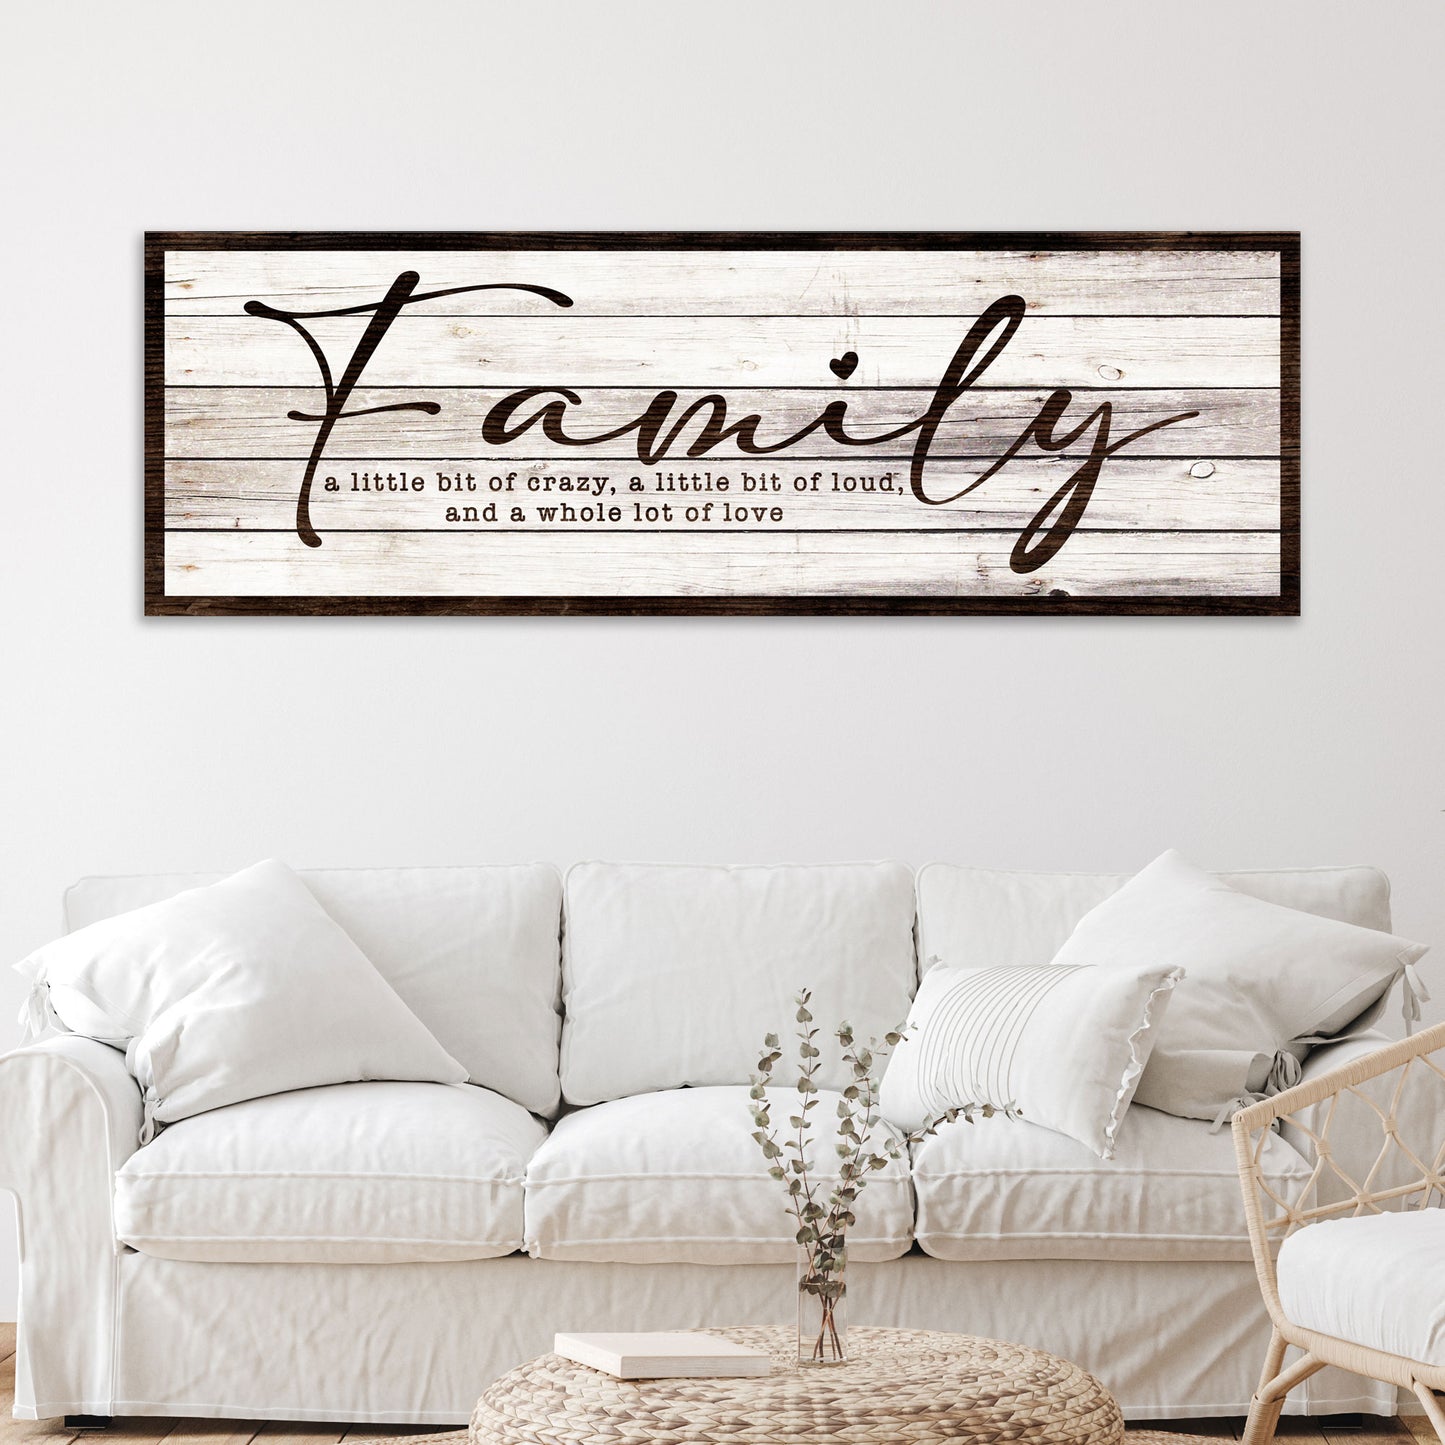 A Little Bit Of Crazy, Loud, And A Whole Lot Of Love Family Sign III - Image by Tailored Canvases